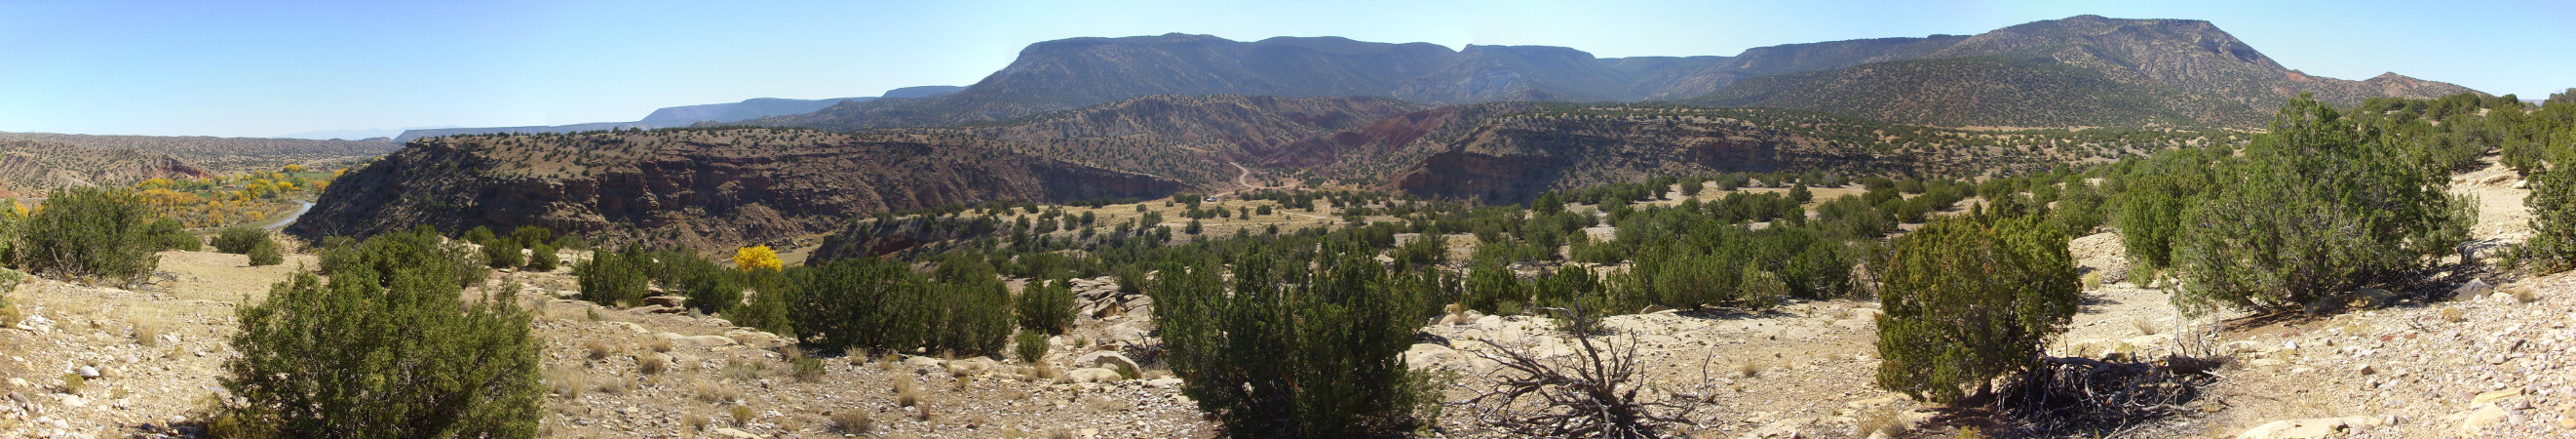 Panorama of Canones
        fault zone